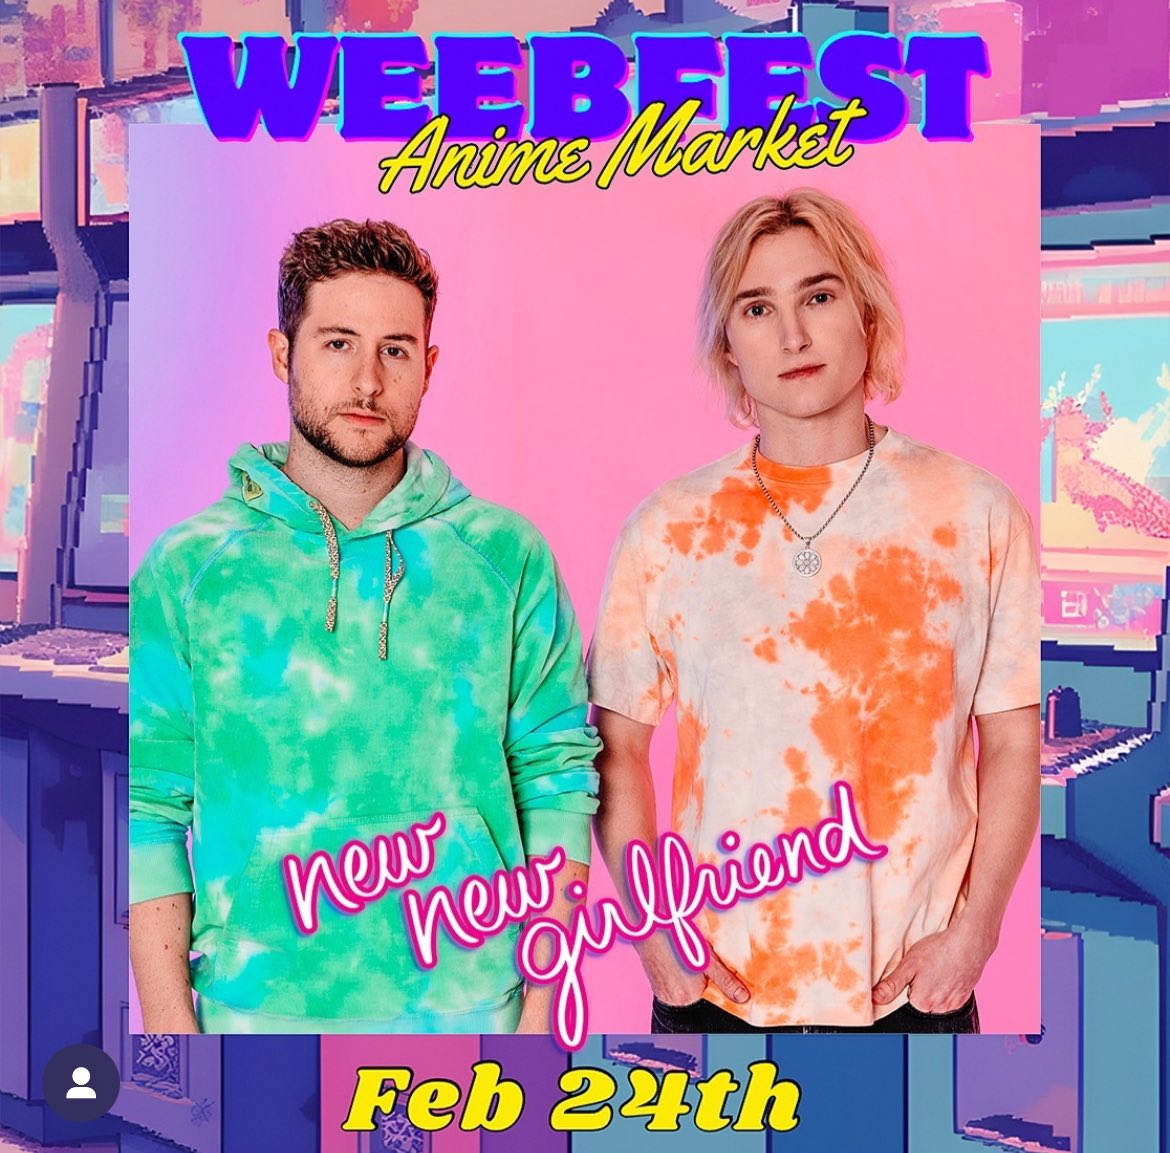 This Saturday in Westminster, CA at the Westminster mall!!! Catch all these cool people plus a performance by my band @newnewgf !!! #weebfest